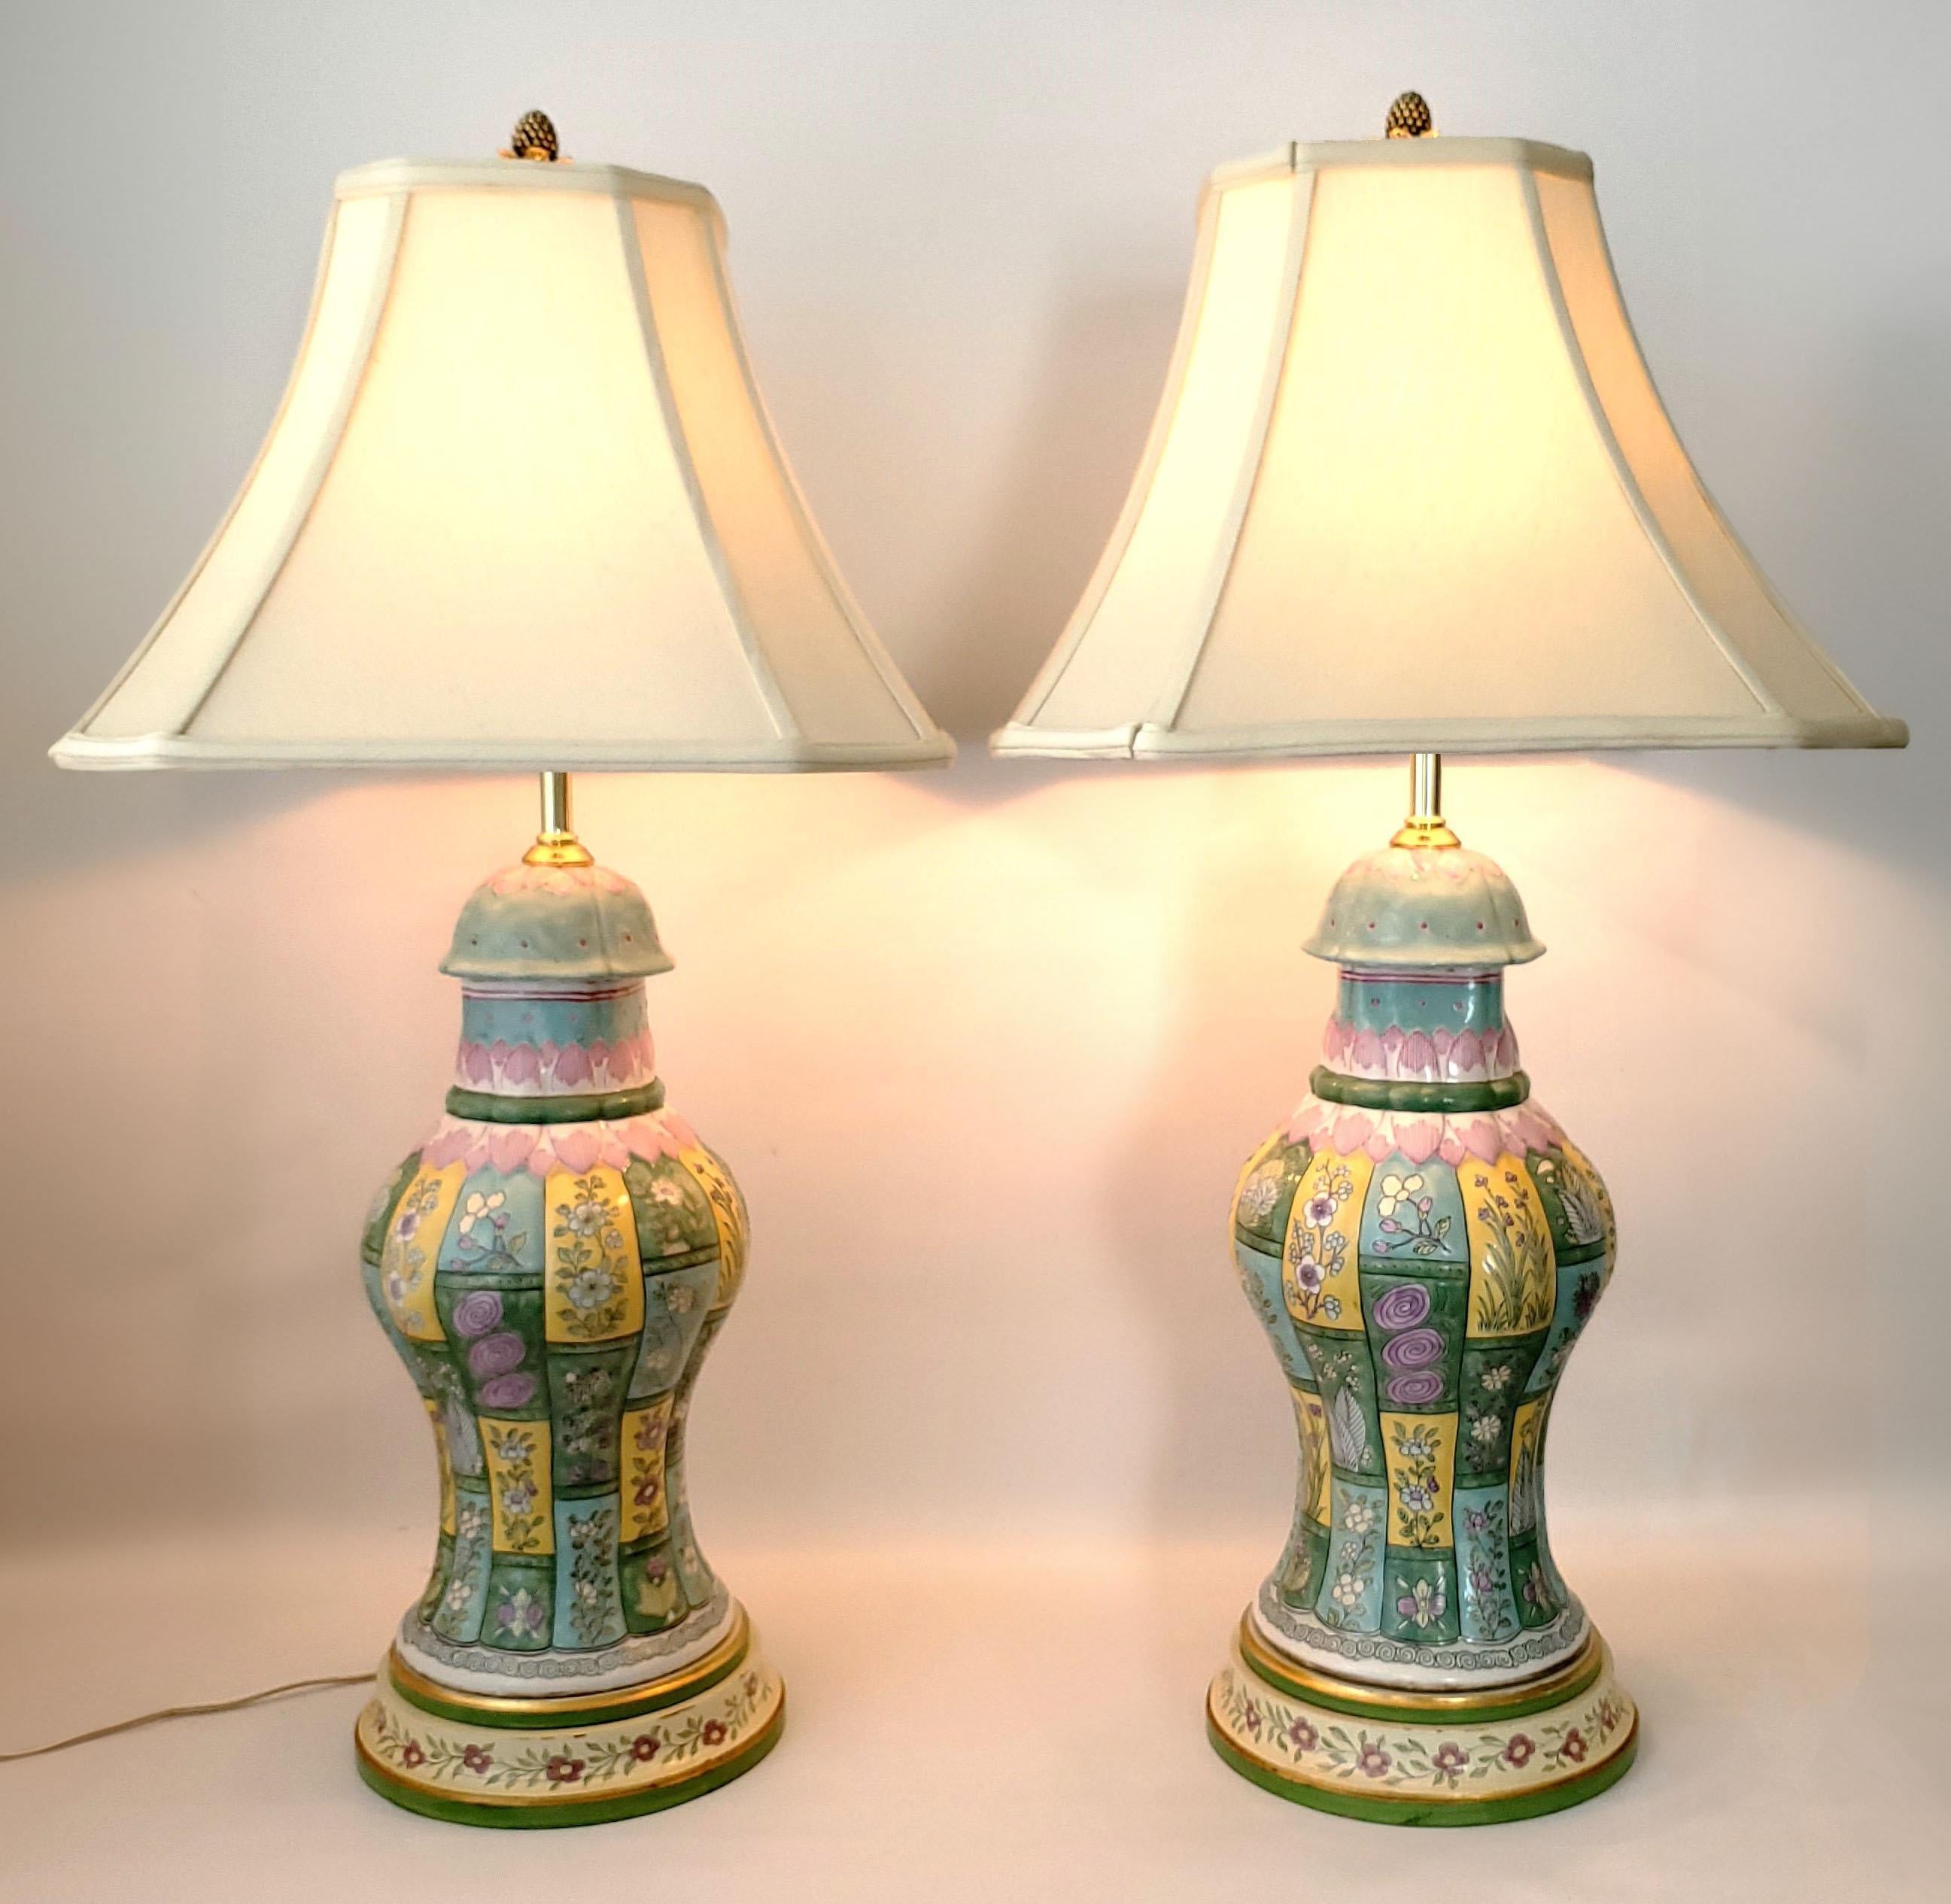 20th Century Pair of Vintage Chinese Porcelain Baluster Table Lamps with Linen & Silk Shades For Sale